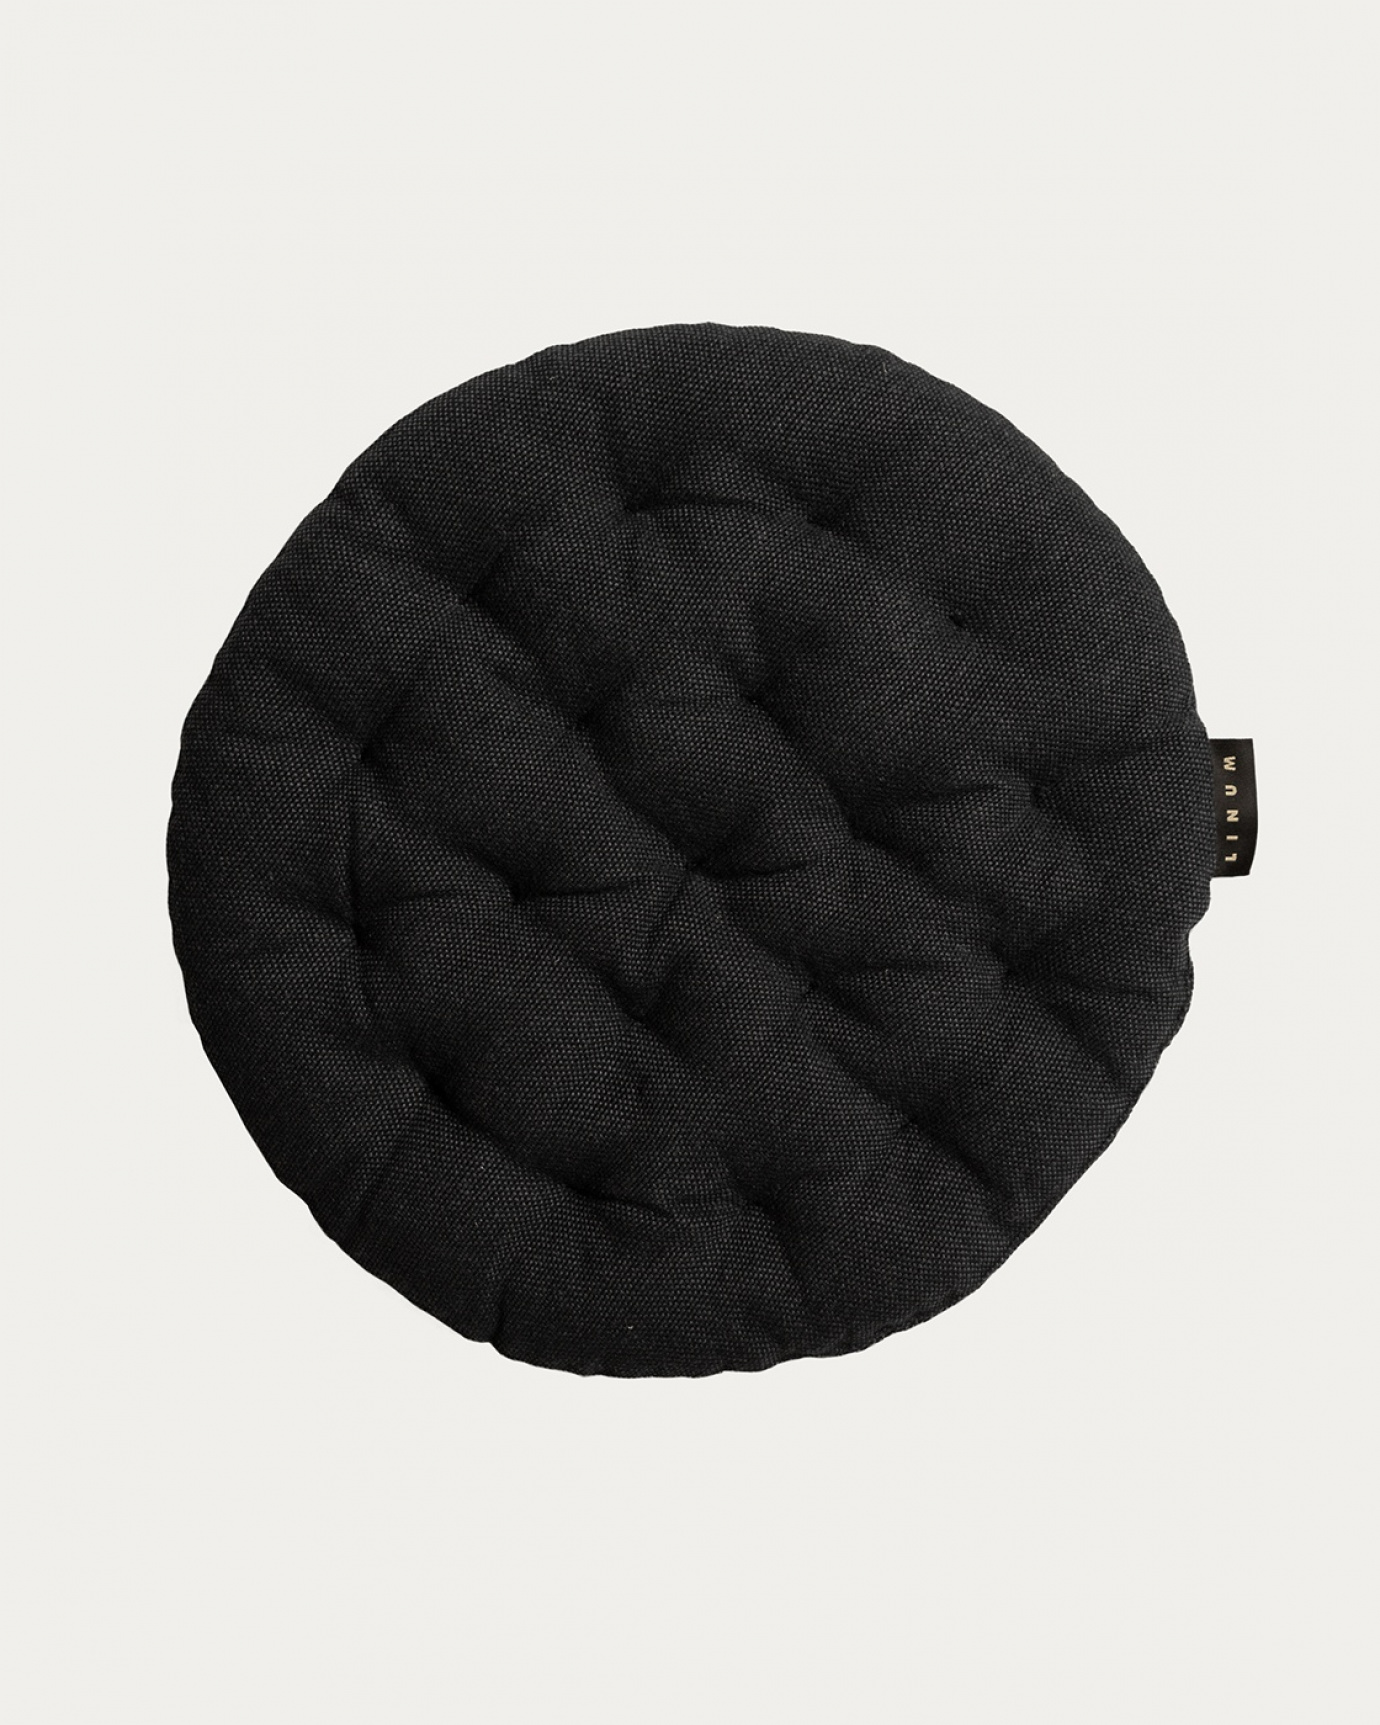 Product image black melange PEPPER seat cushion made of soft cotton with recycled polyester filling from LINUM DESIGN. Size ø37 cm.